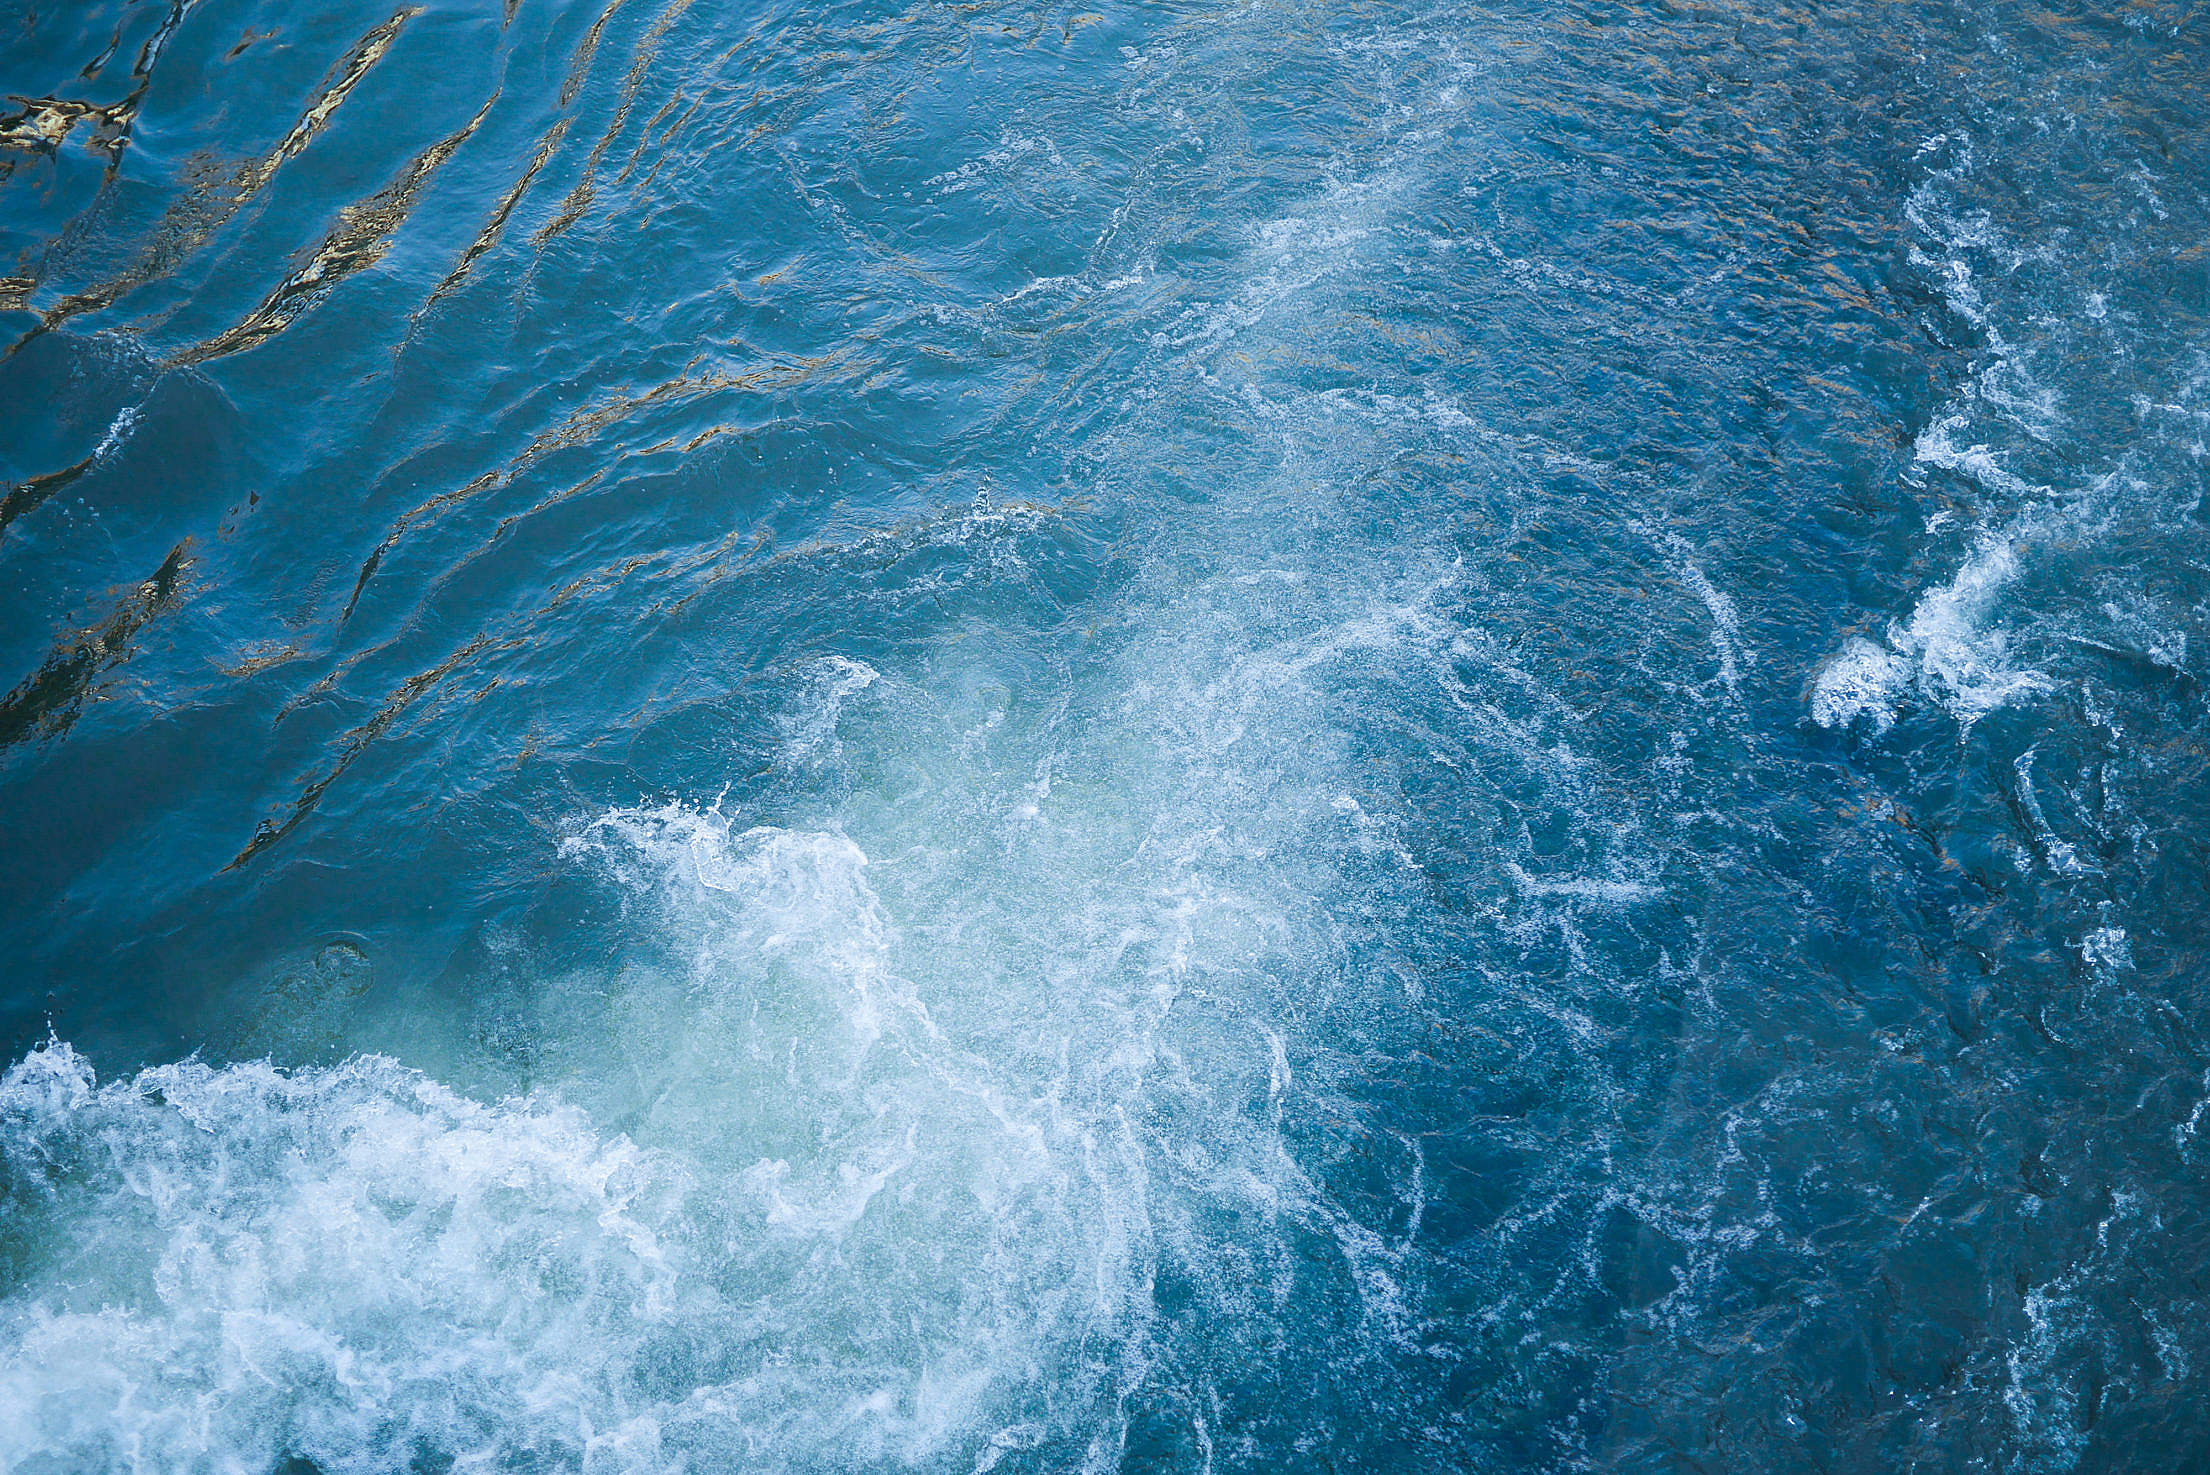 Blue Sea Waves Behind The Boat Free Stock Photo Download | picjumbo